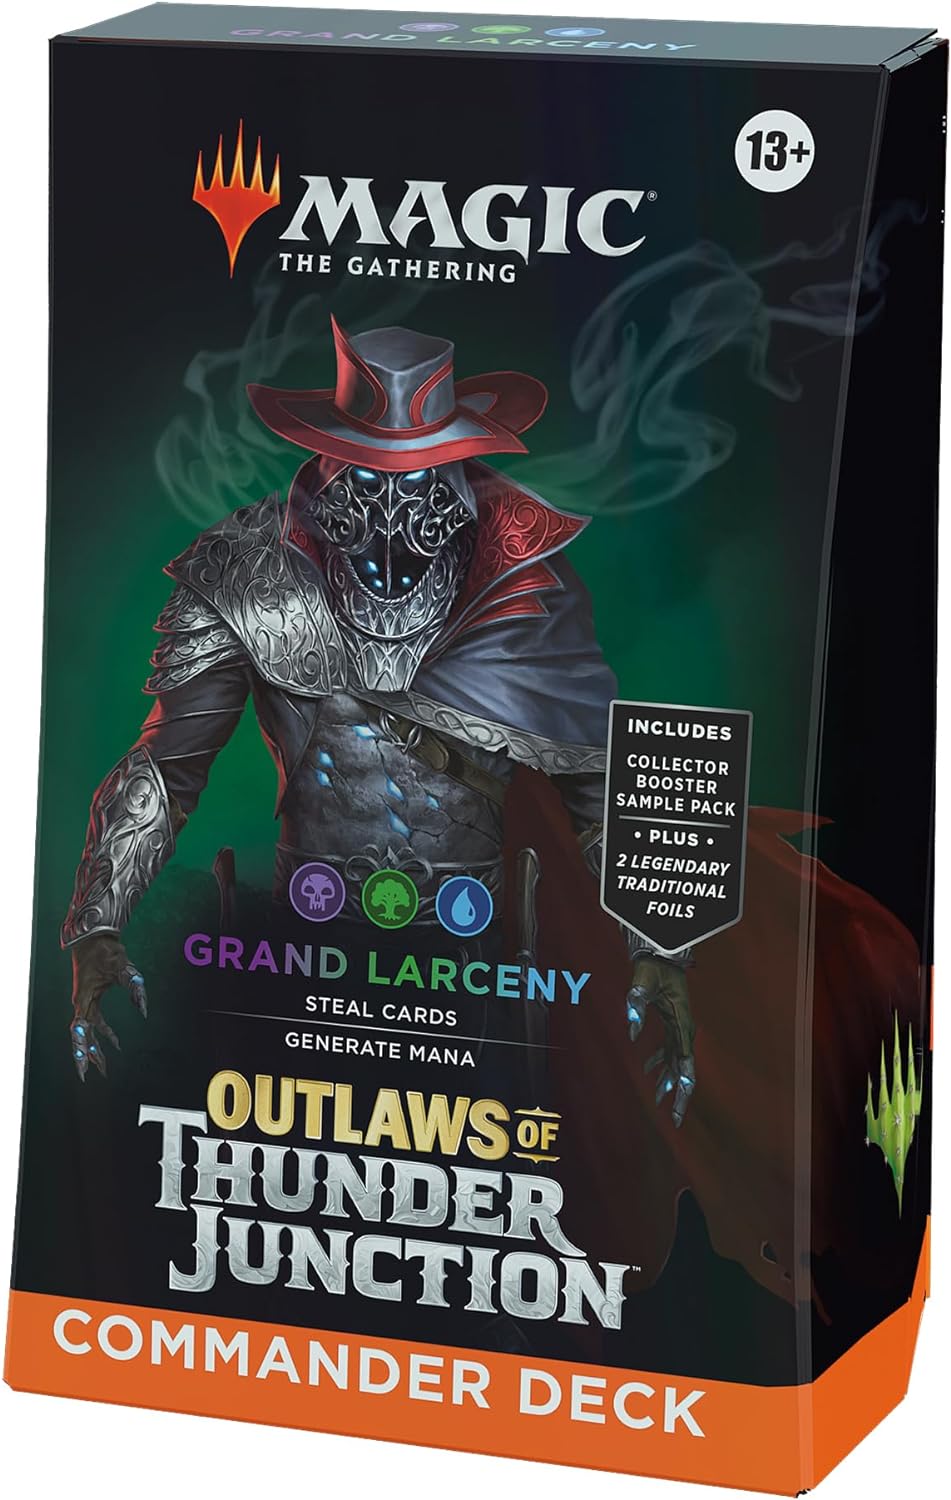 Magic: The Gathering Outlaws of Thunder Junction Commander Deck - Grand Larceny (100-Card Deck, 2-Card Collector Booster Sample Pack + Accessories), Trading Cards made by Magic The Gathering. Exit 23 Games 